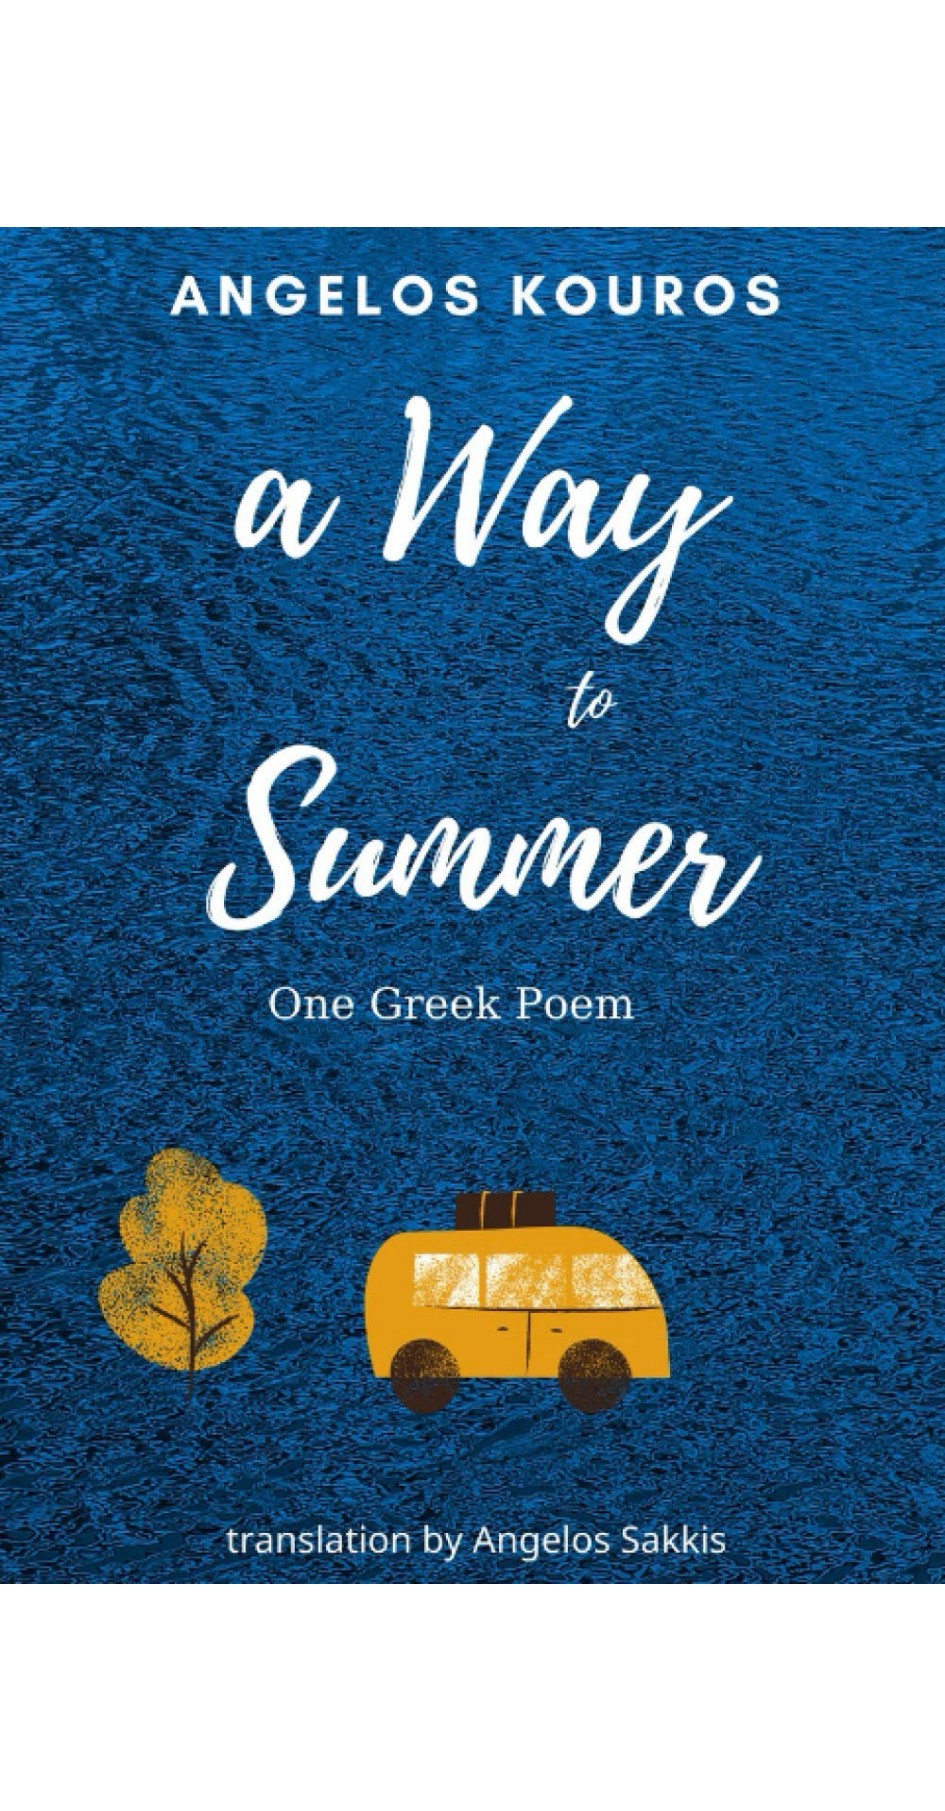 A  way to Summer - One Greek poem